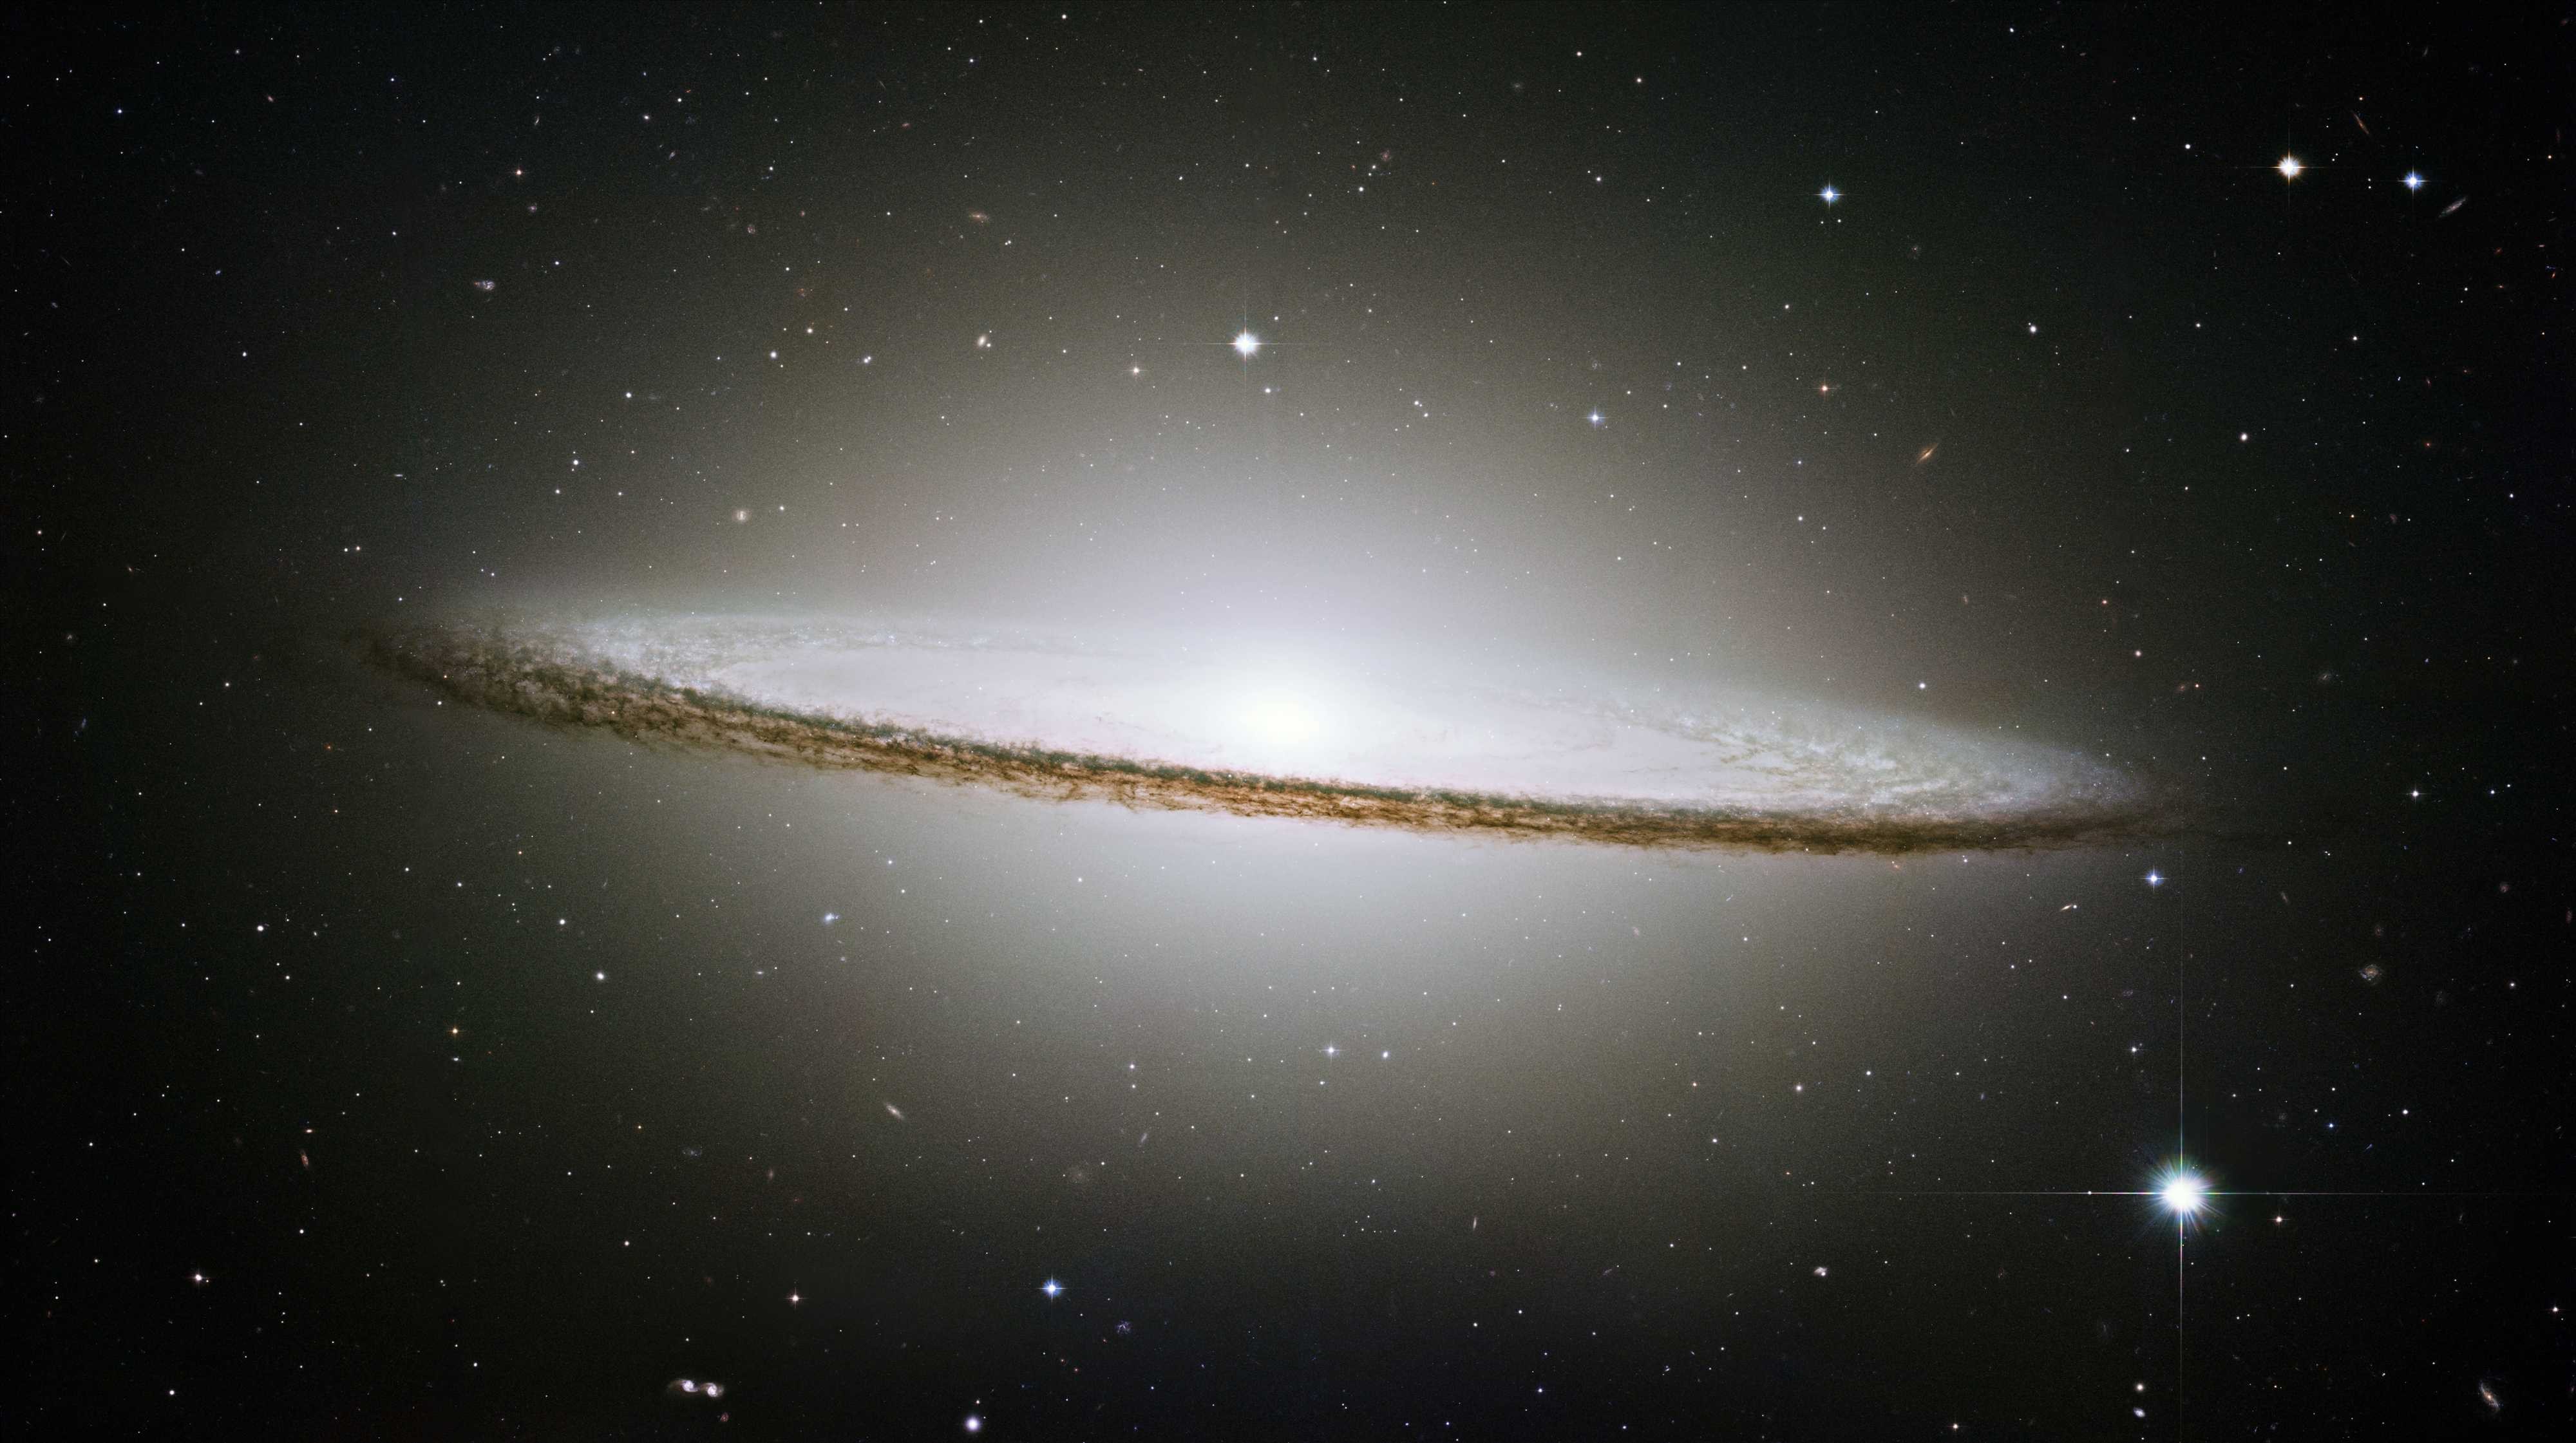 outer space, stars, galaxies, planets, sombrero galaxy - desktop wallpaper